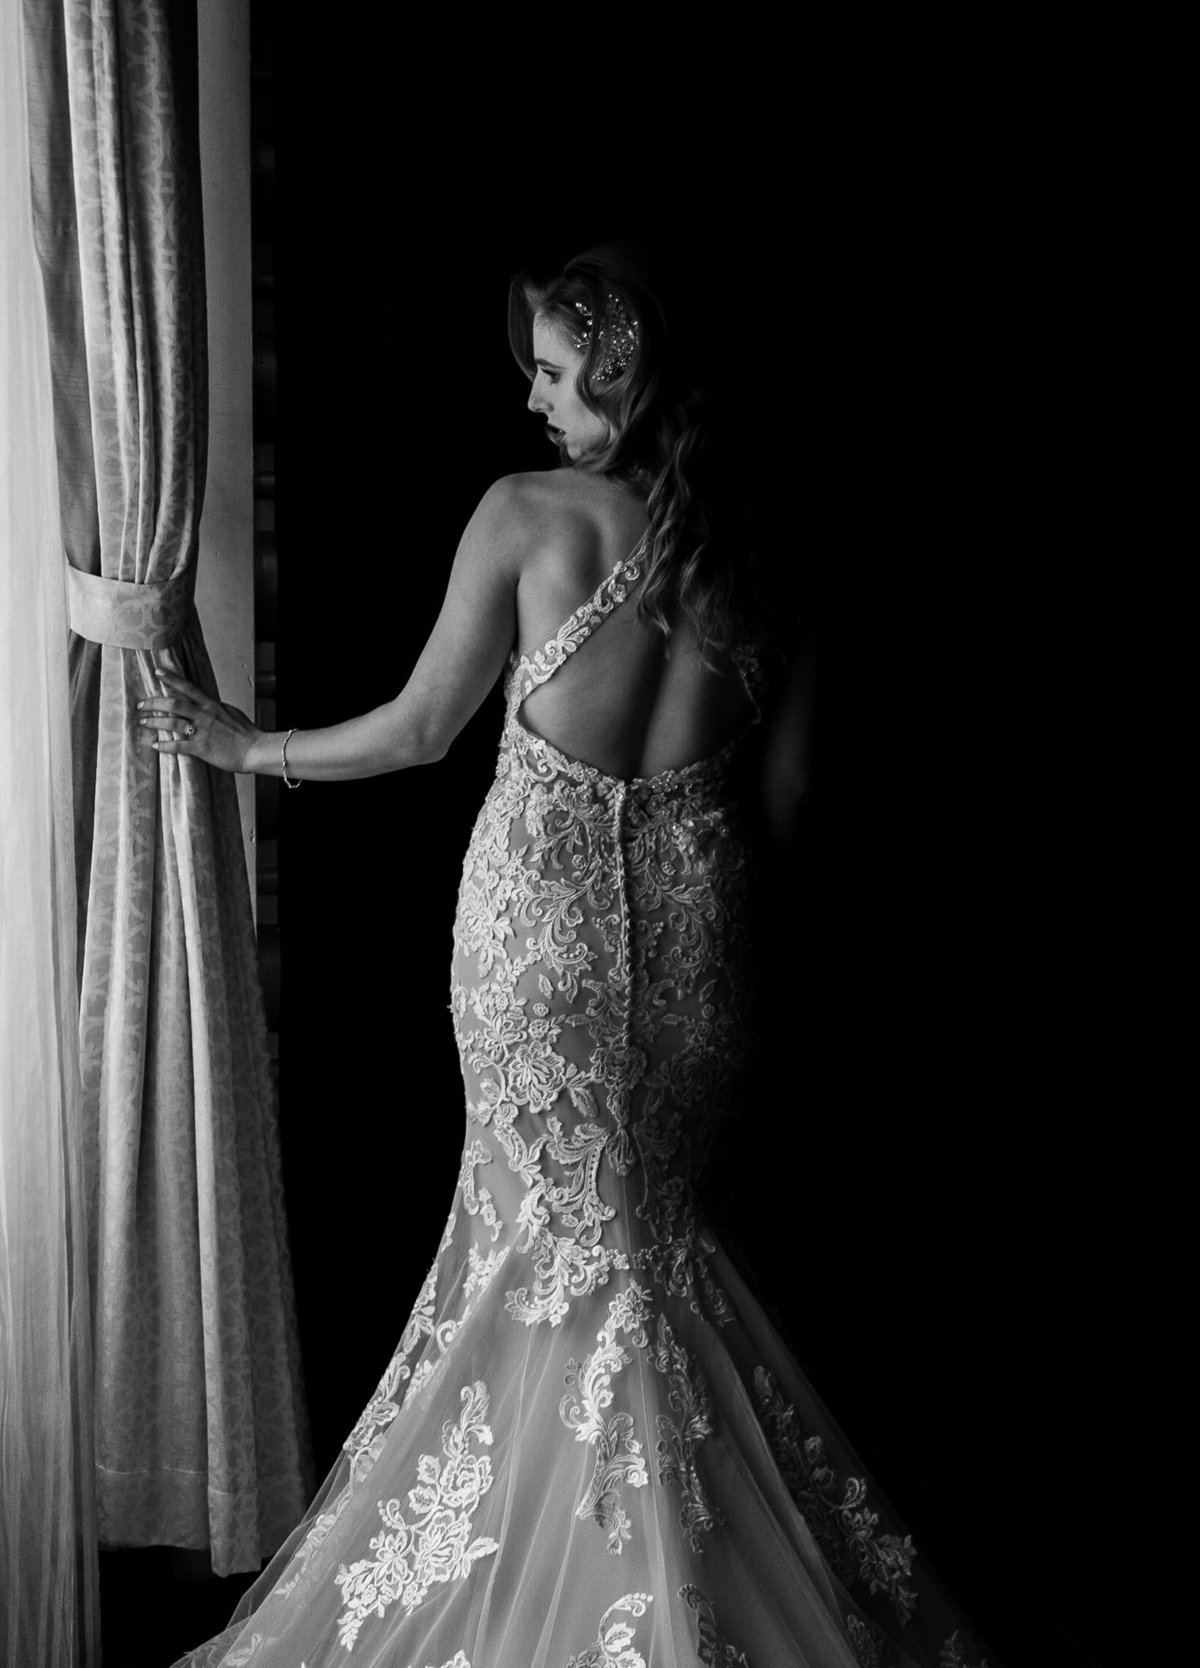 A bride featuring her wedding dress by a window.